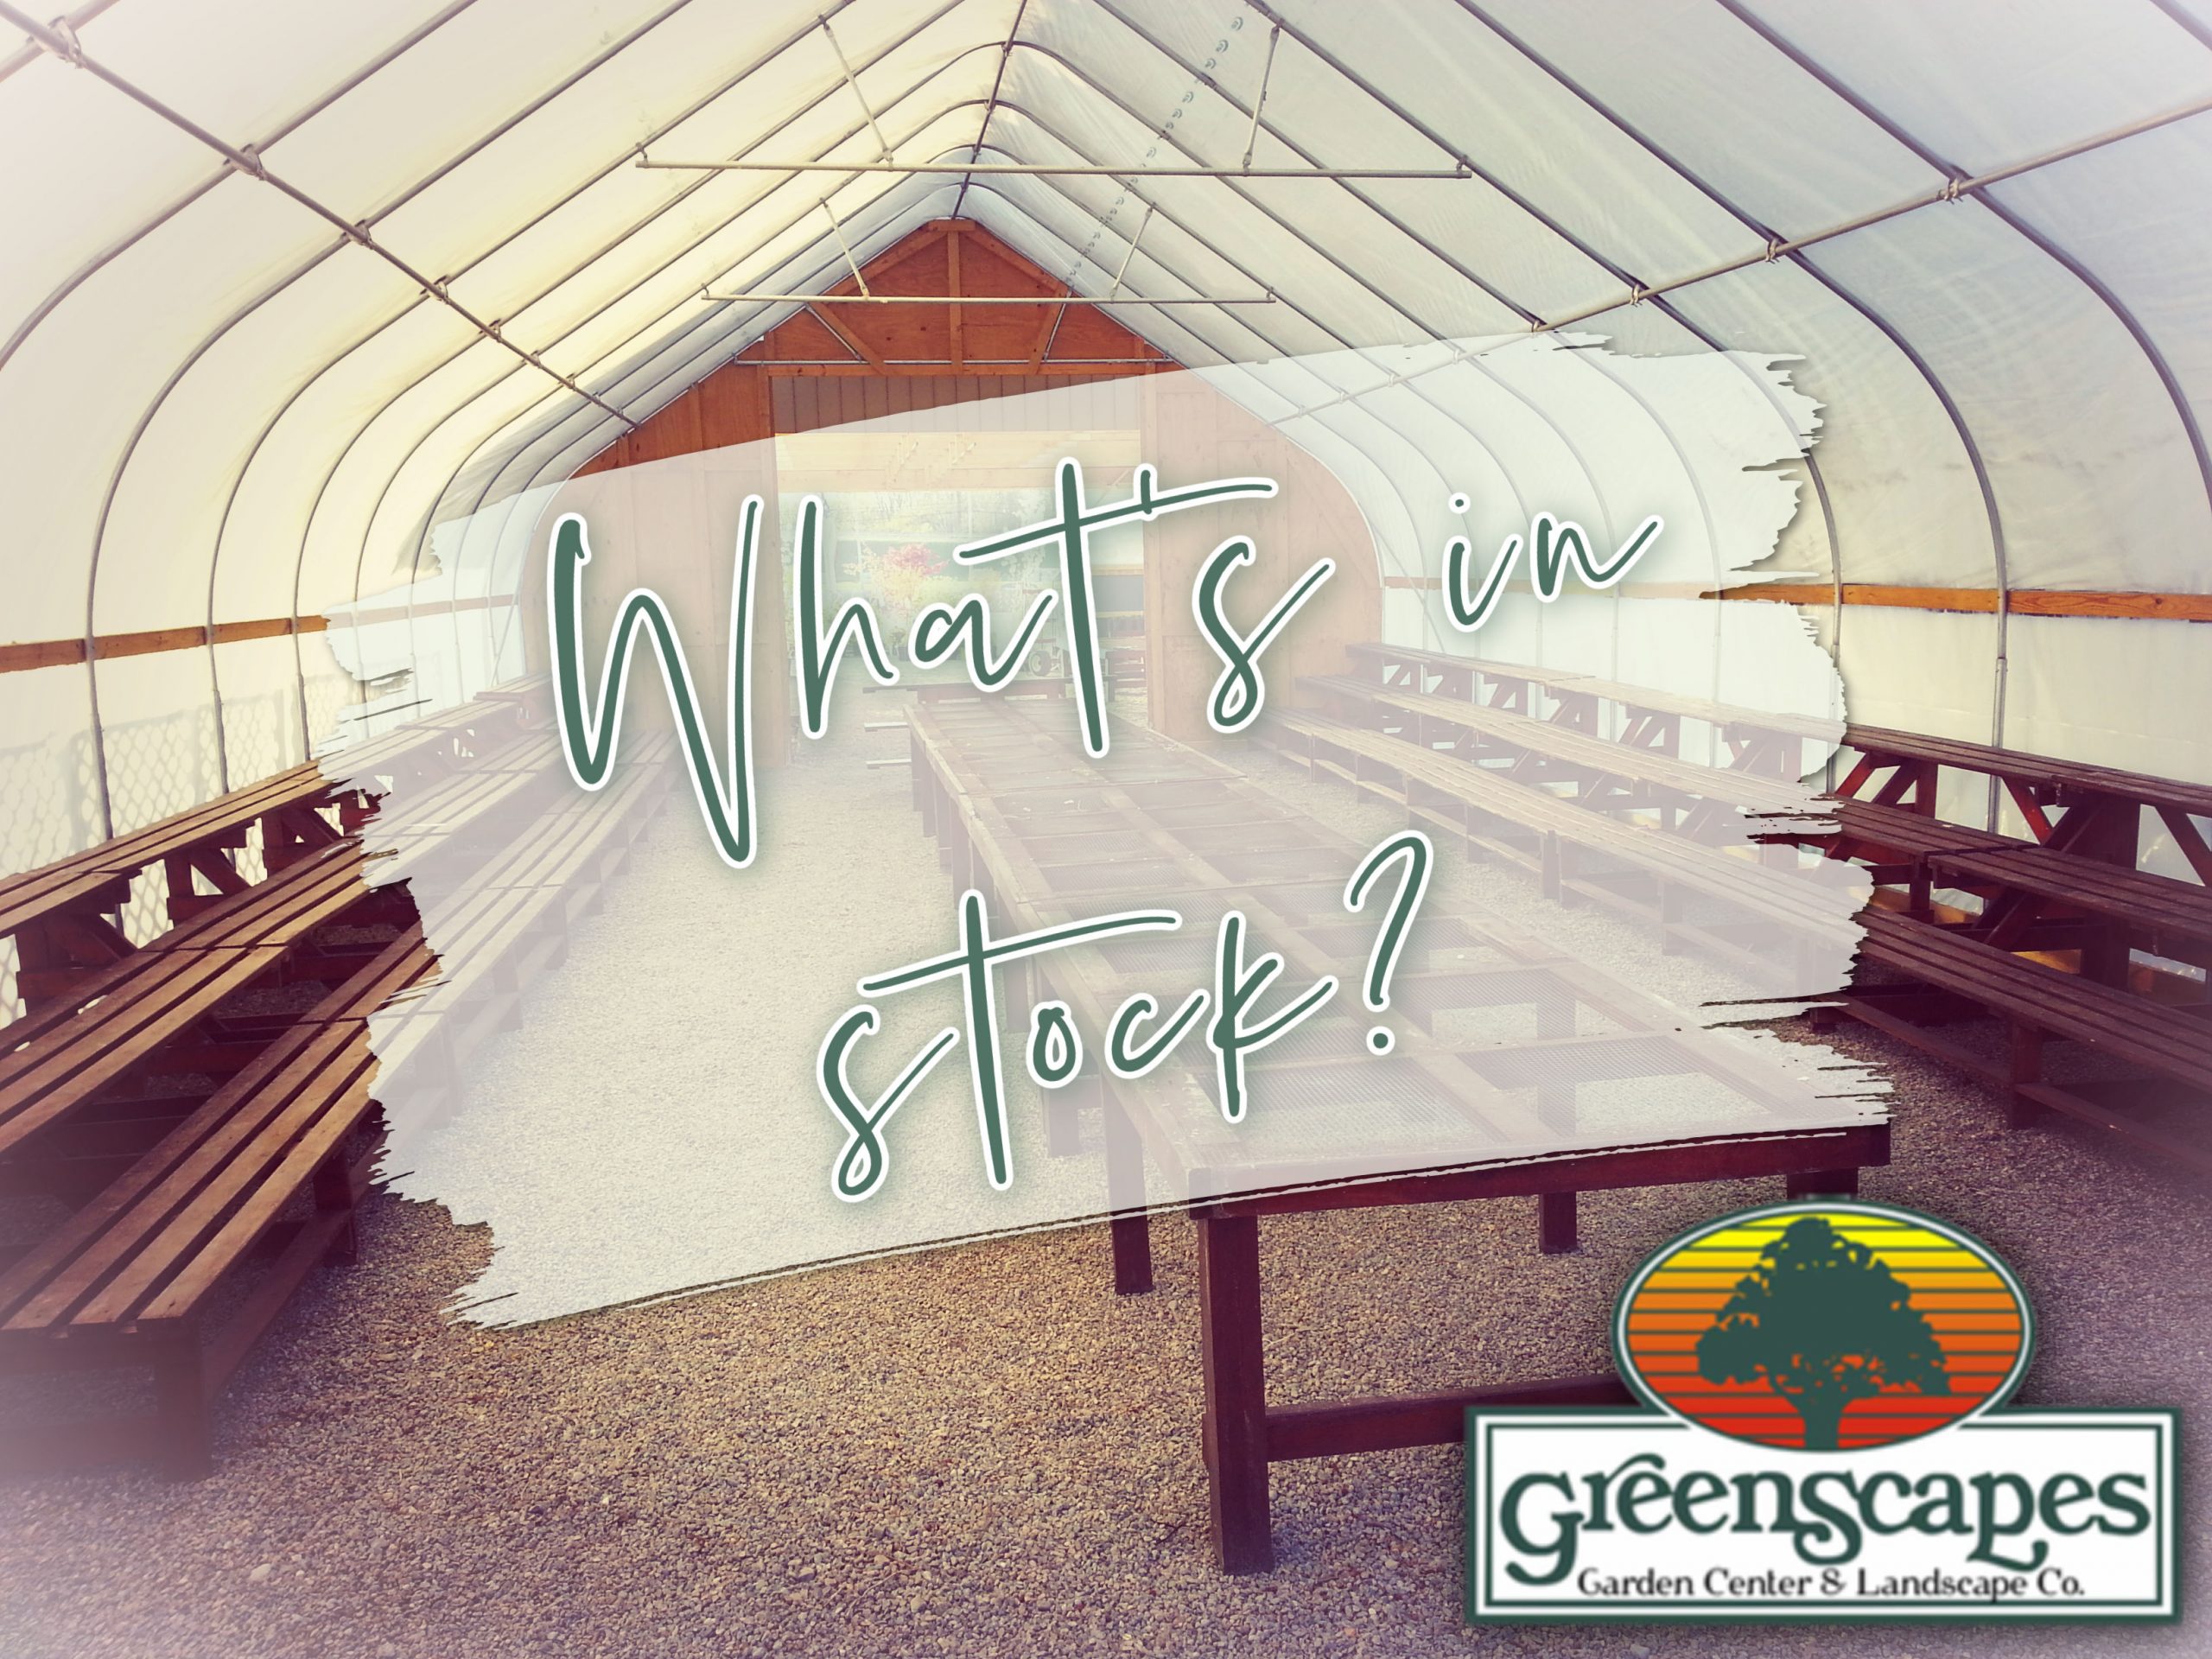 whats in stock at greenscapes